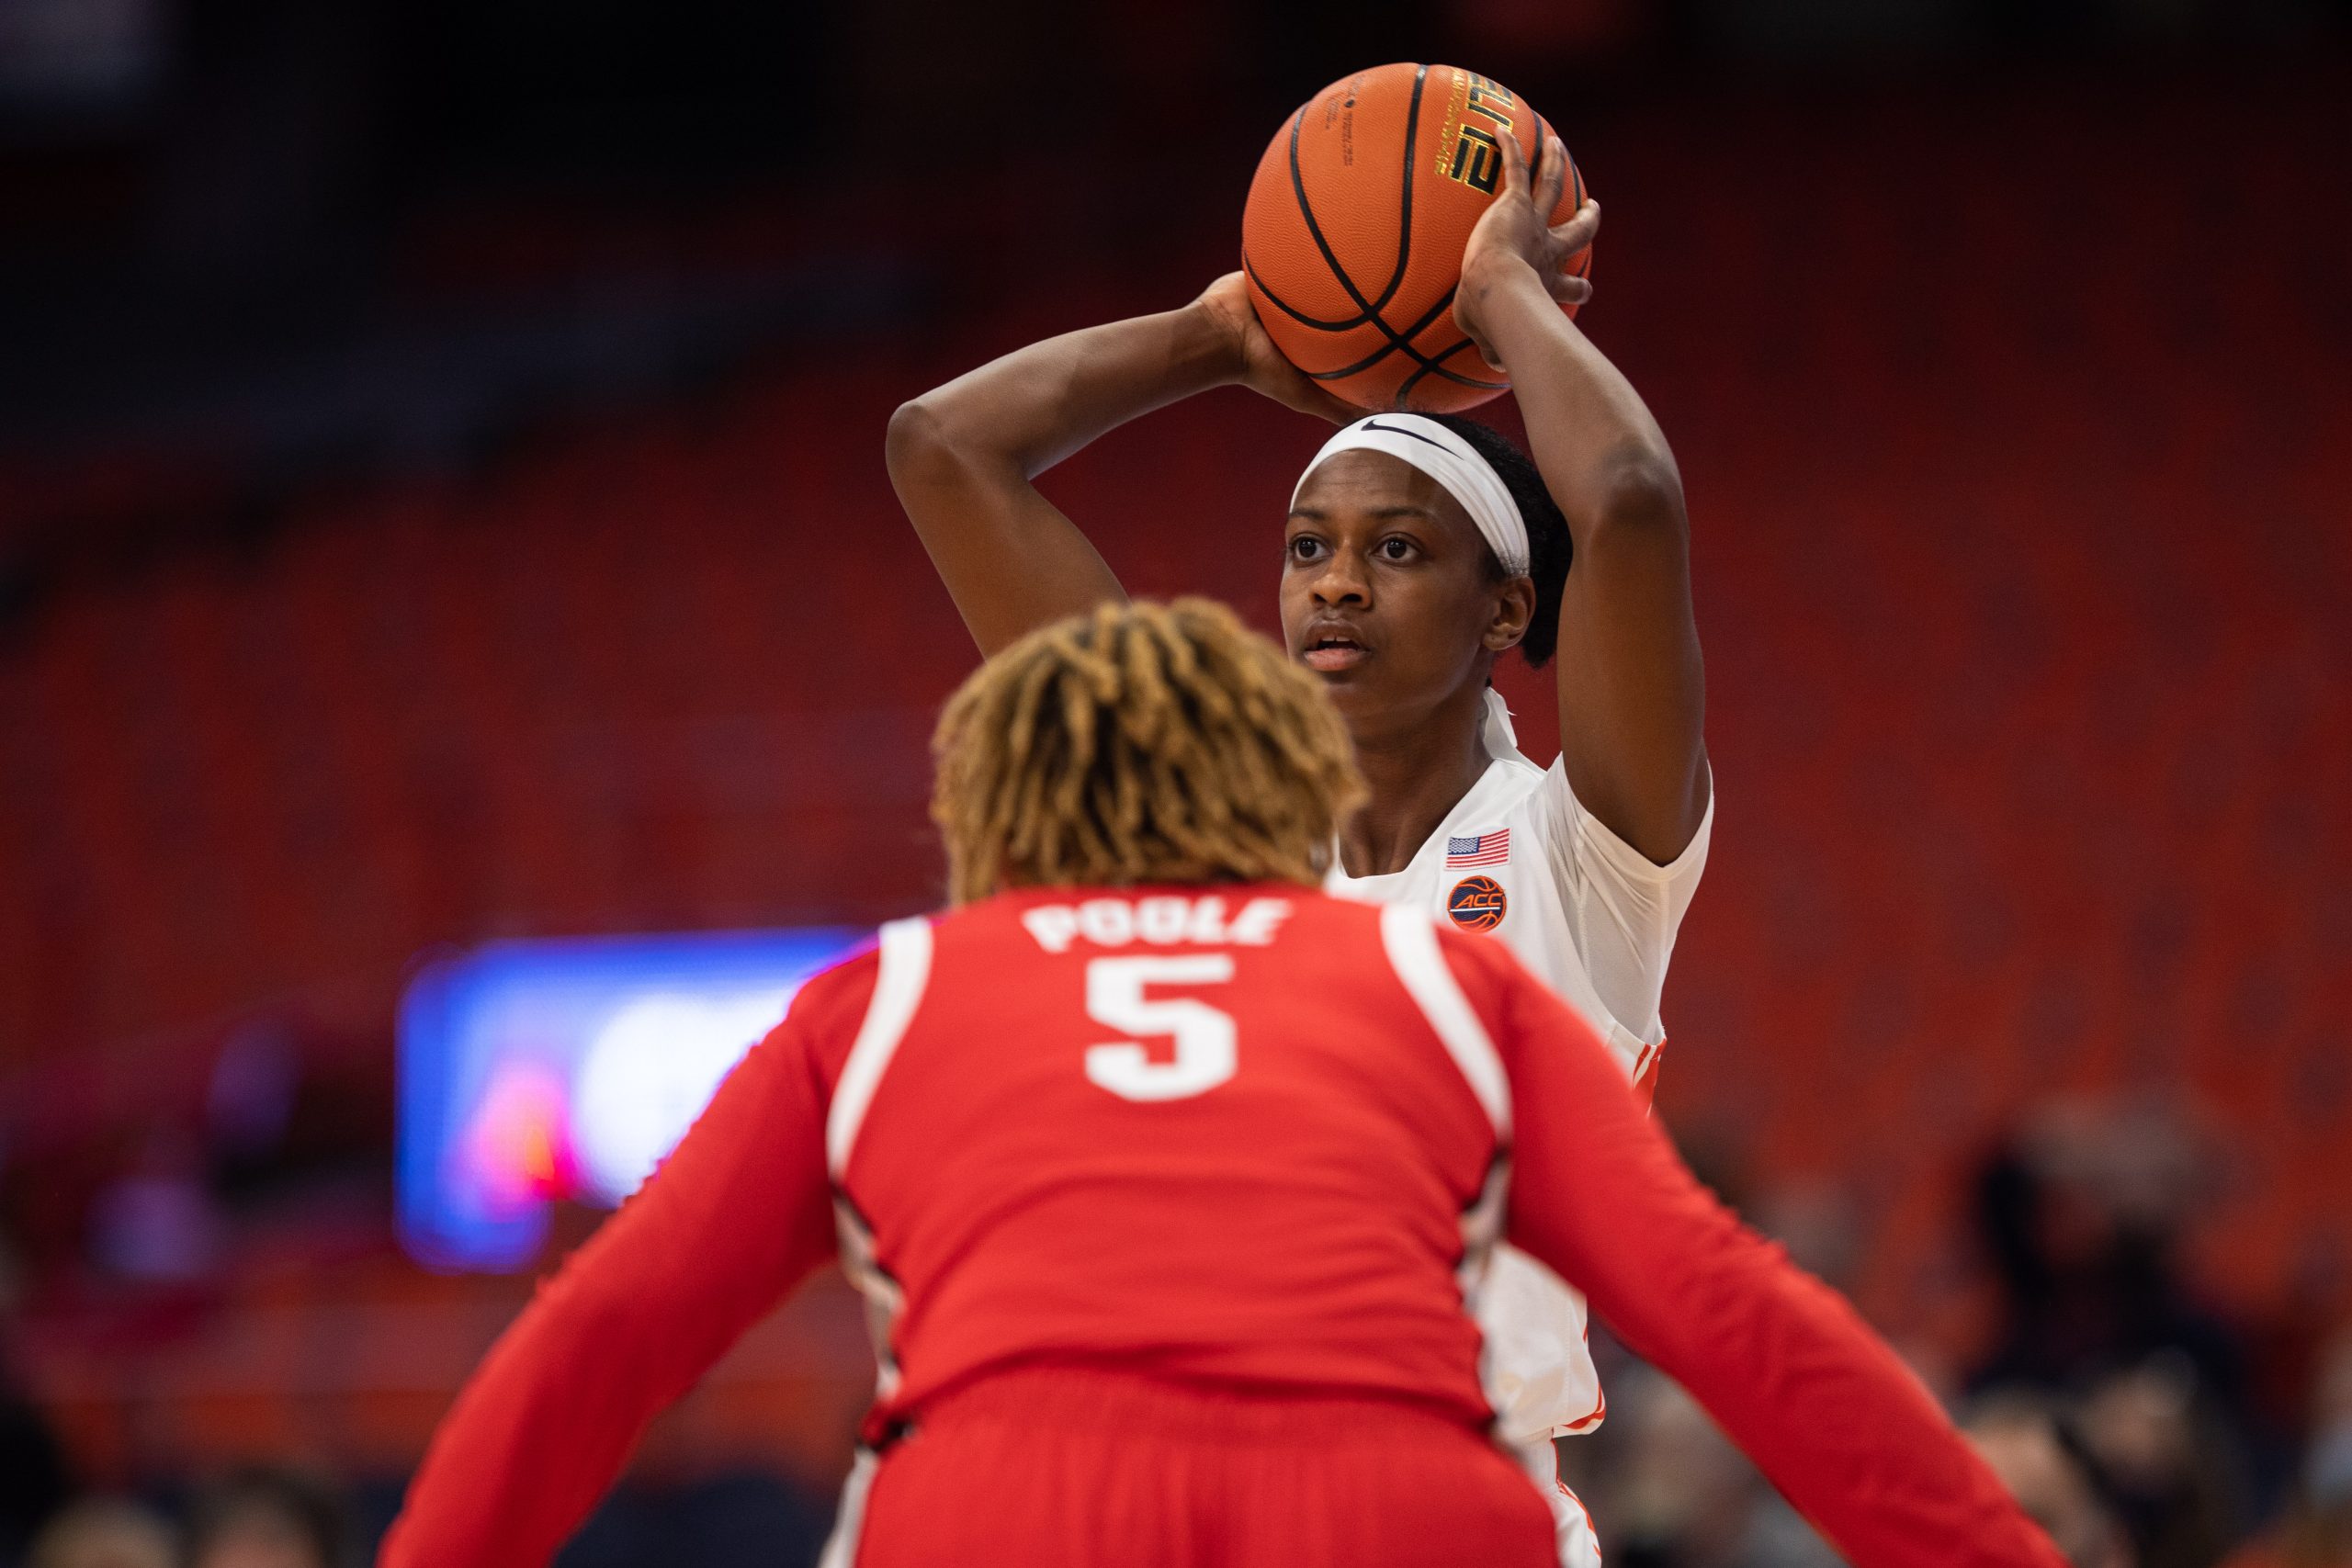 Teisha Hyman looks for a lane to drive for two of her career-high 30 points against Ohio State.